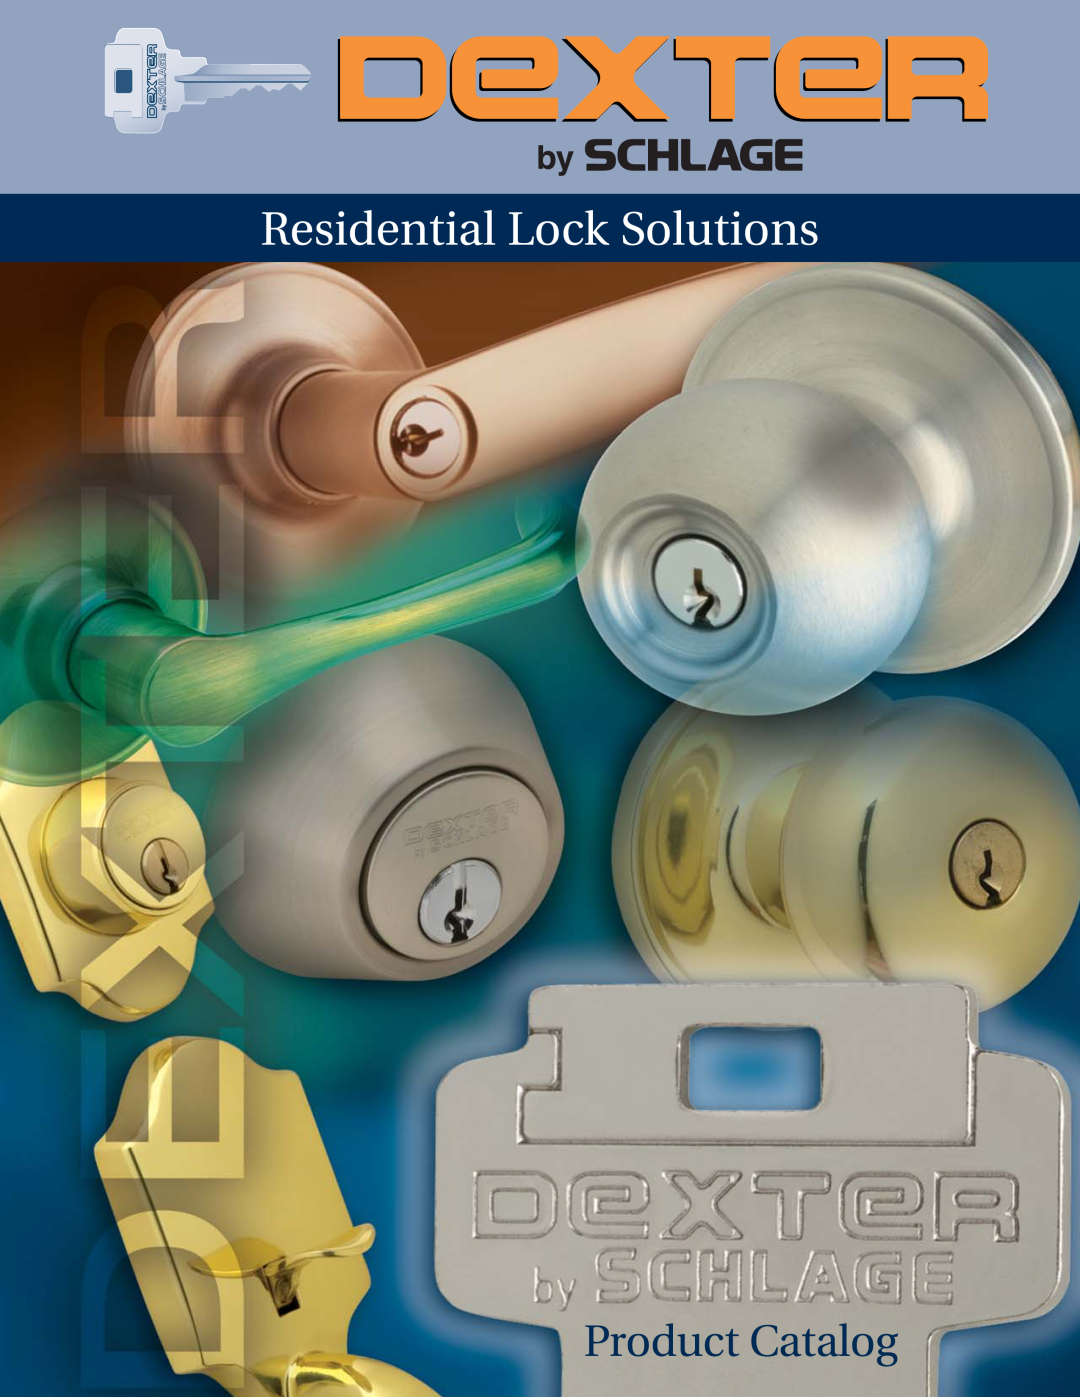 Schlage manual Residential Lock Solutions, Product Catalog 